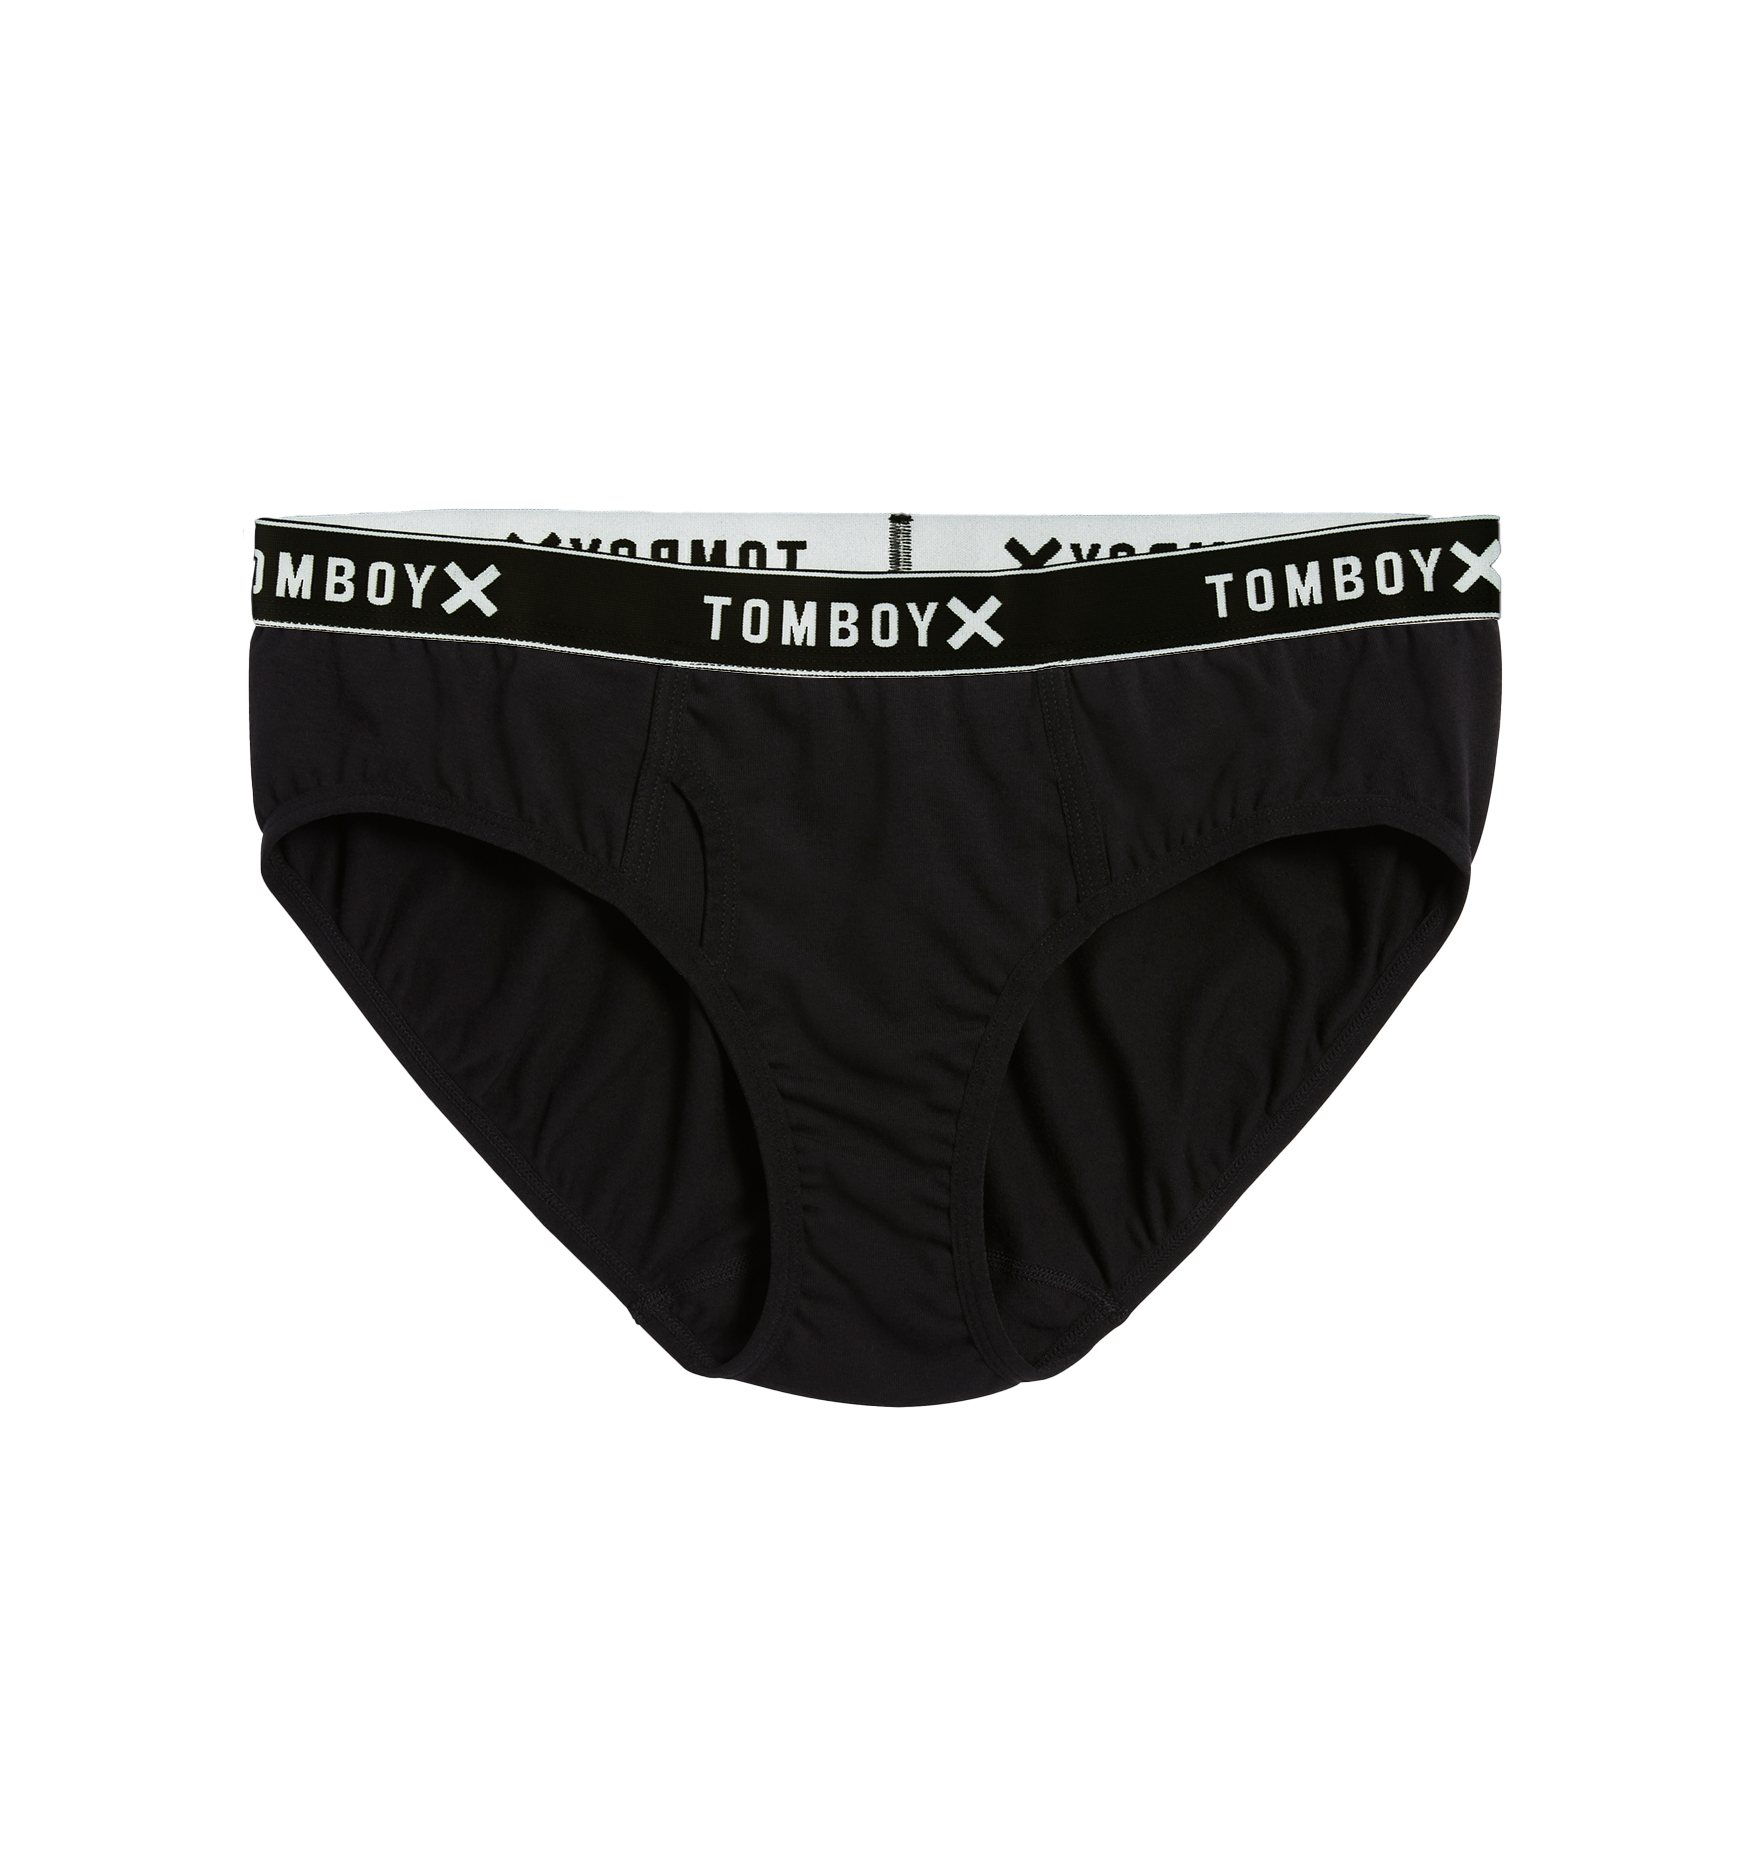 Iconic Low-Rise Briefs: Underwear for All